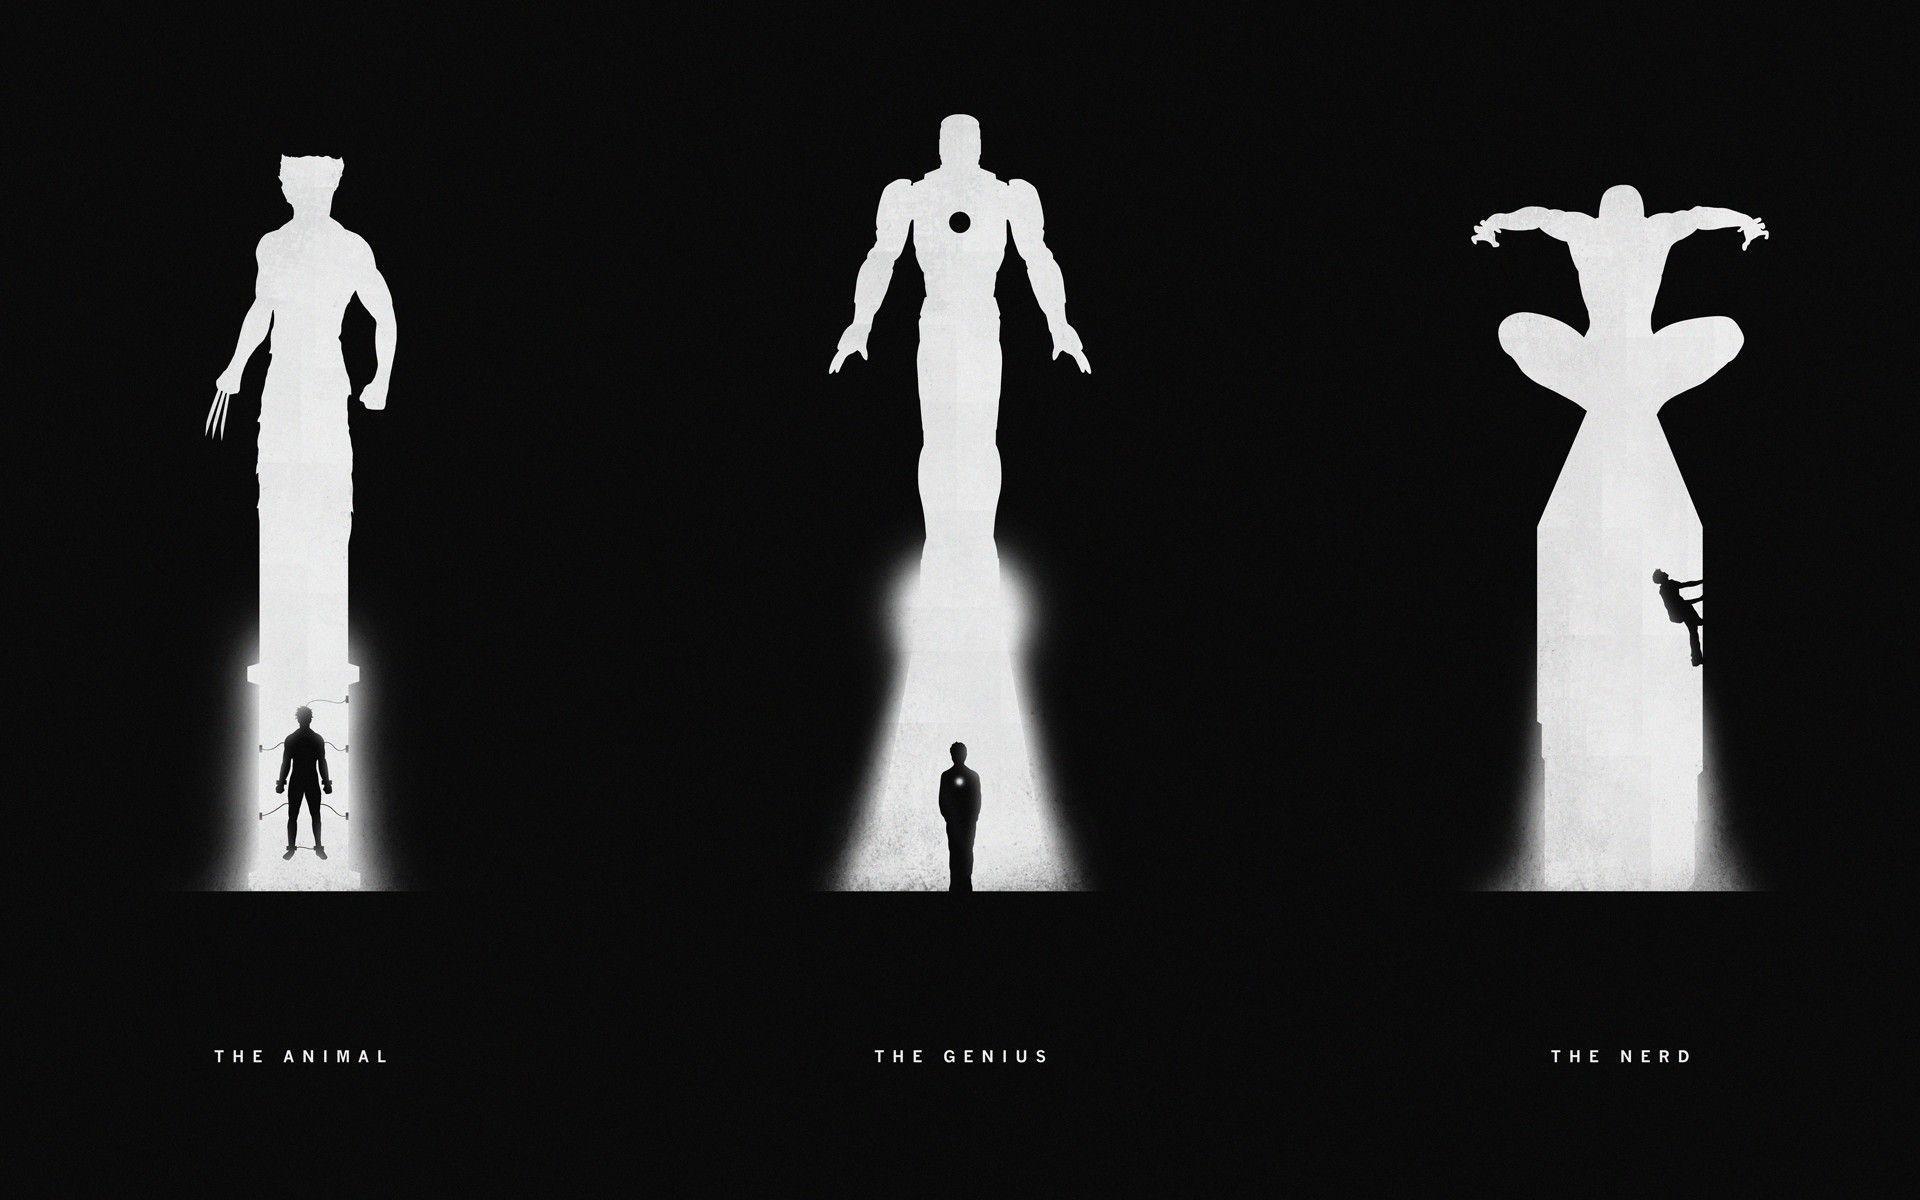 Superhero Silhouettes Vector Wallpaper 1920x1200 px Free Download